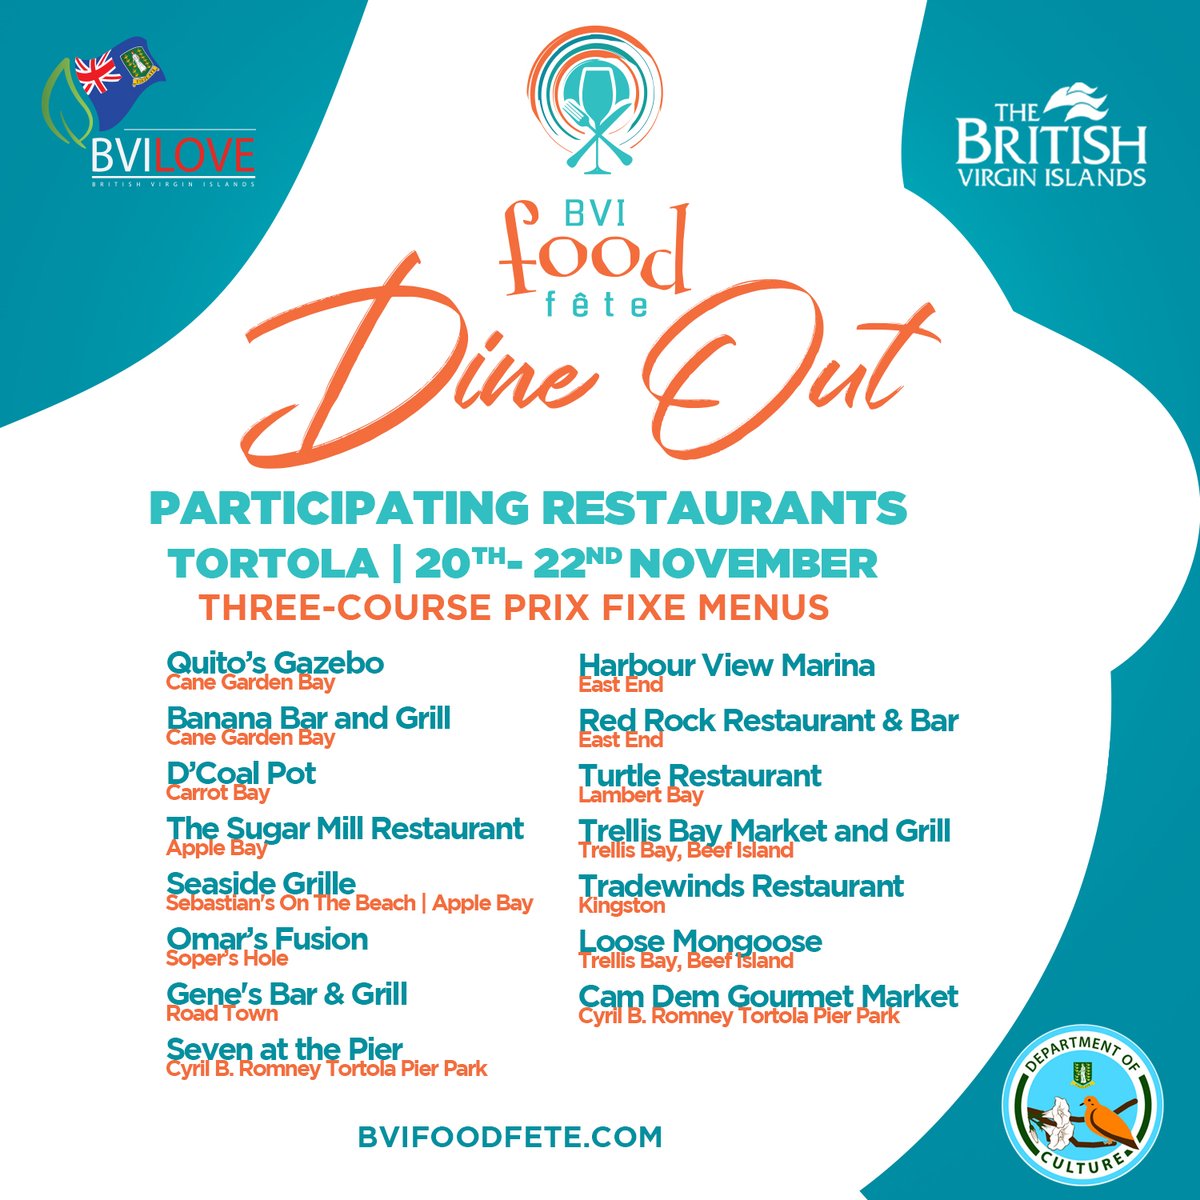 See which of your favorite restaurants is participating in this weekends BVI Food Fete: Dine Out Tortola! Each restaurant will be preparing a 3 course menu just for you. Don't miss this.🍴🍹

Stay connected for menu updates.

#BVIdineout #DineOutBVI #bvifoodfete #OURBVI #BVILove